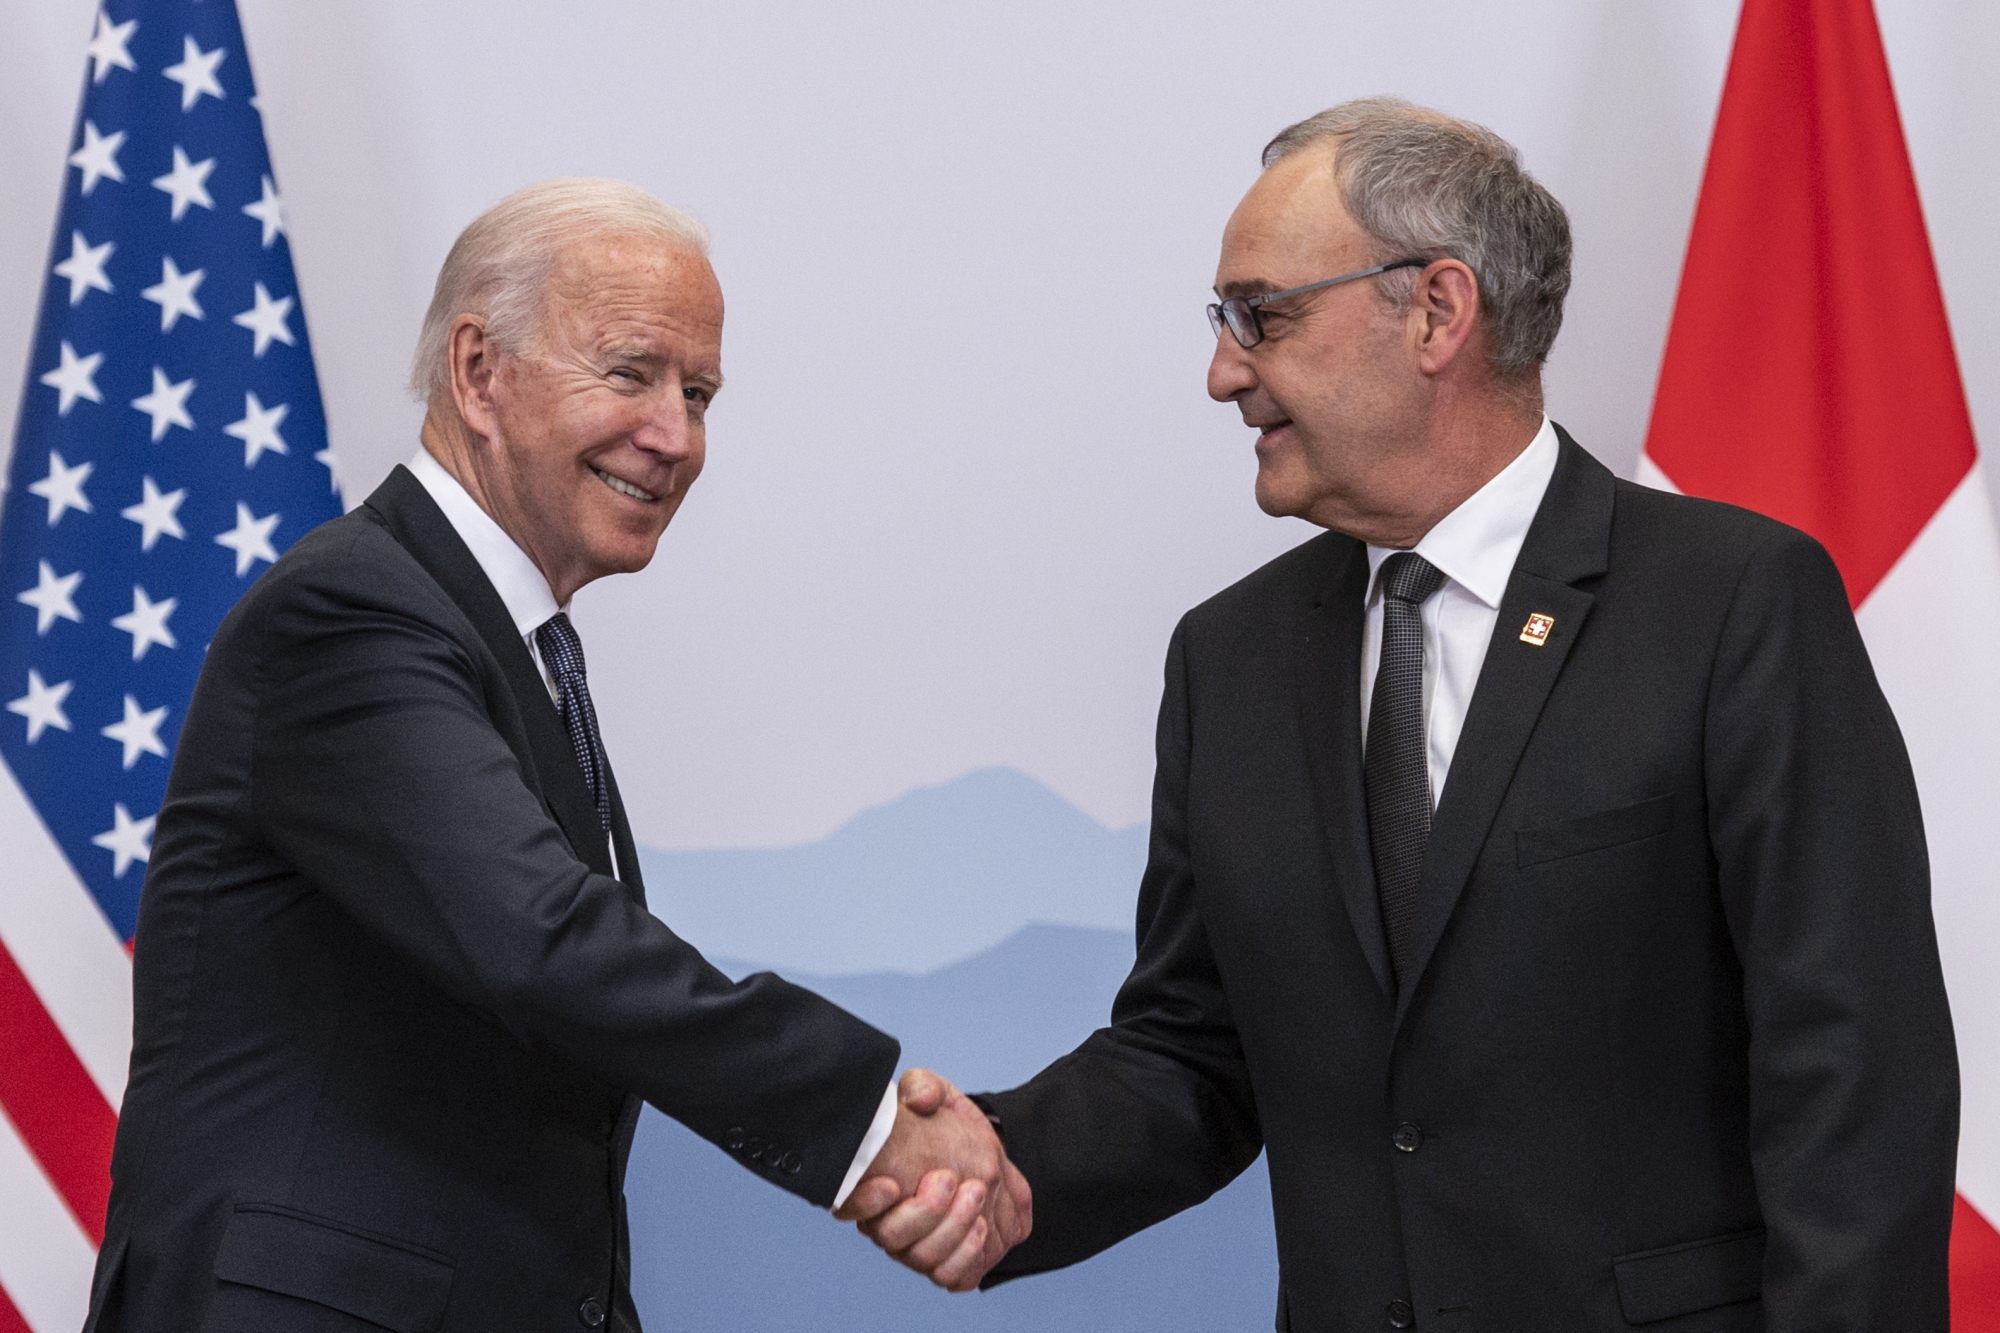 Swiss Federal president Guy Parmelin, right, greets US president Joe Biden, ahead of bilateral talks on the sidelines of the US - Russia summit in Geneva, Switzerland, Tuesday, June 15, 2021. The meeting between US President Joe Biden and Russian President Vladimir Putin is scheduled in Geneva for Wednesday, June 16, 2021. (KEYSTONE/POOL/Alessandro della Valle)